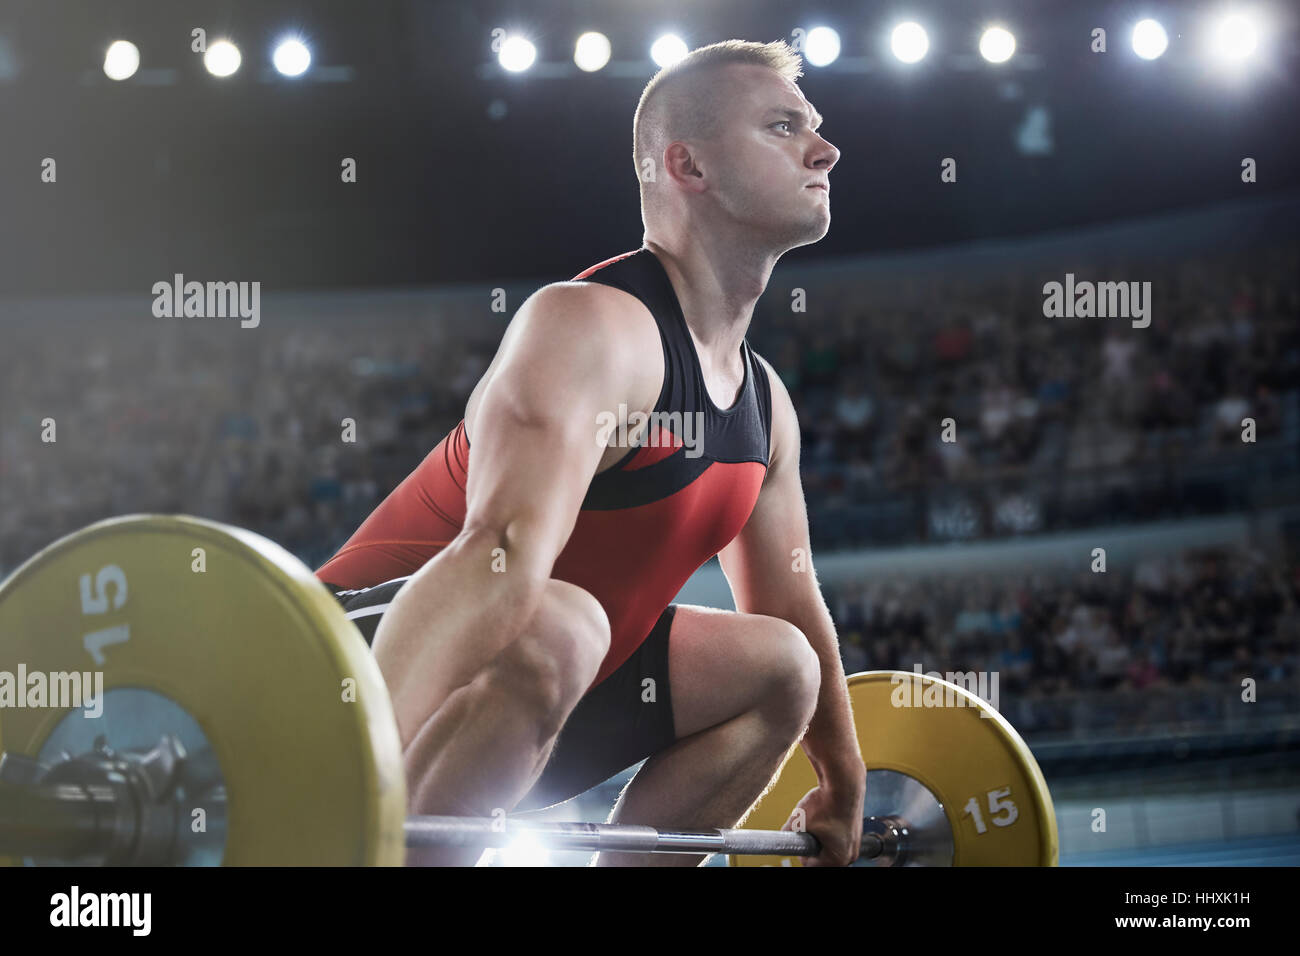 Focused male weightlifter lifting barbell Stock Photo